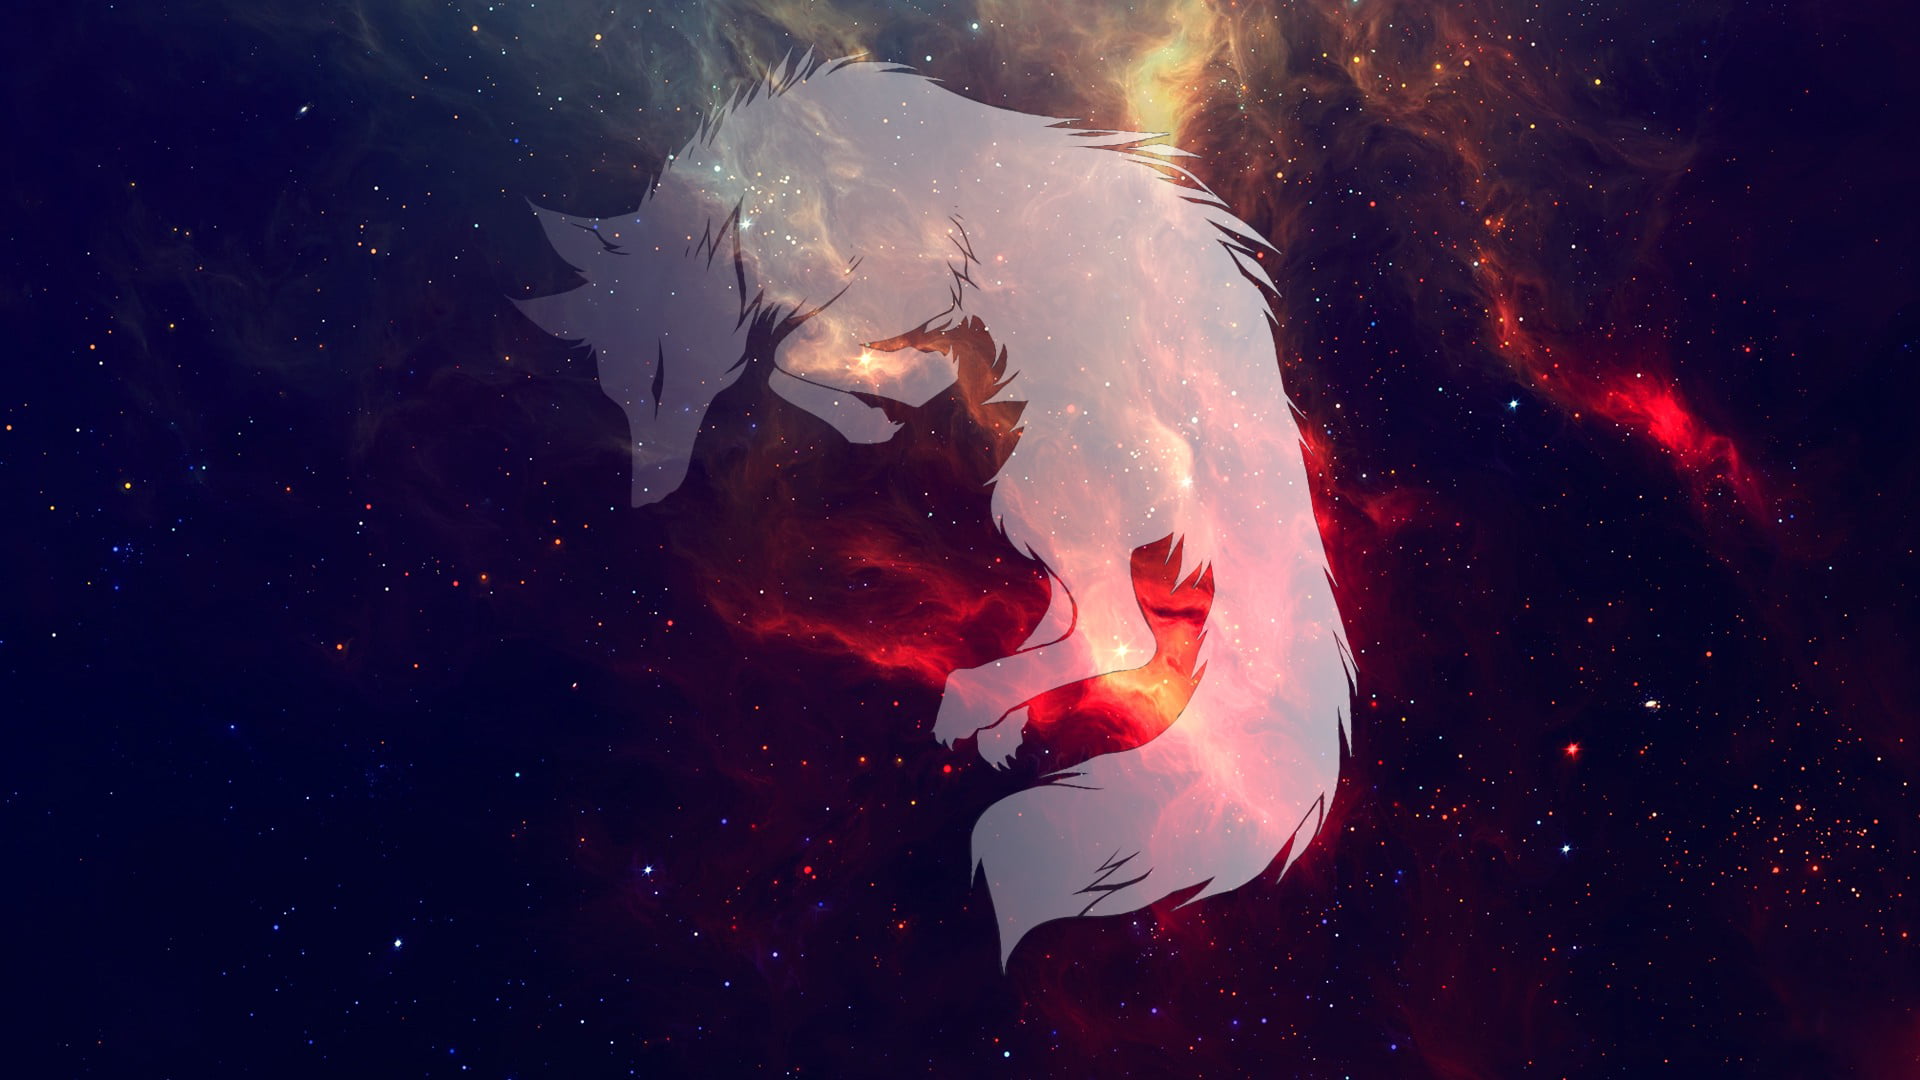 wolf illustration, space, galaxy, sleeping, animal themes, animals in the wild